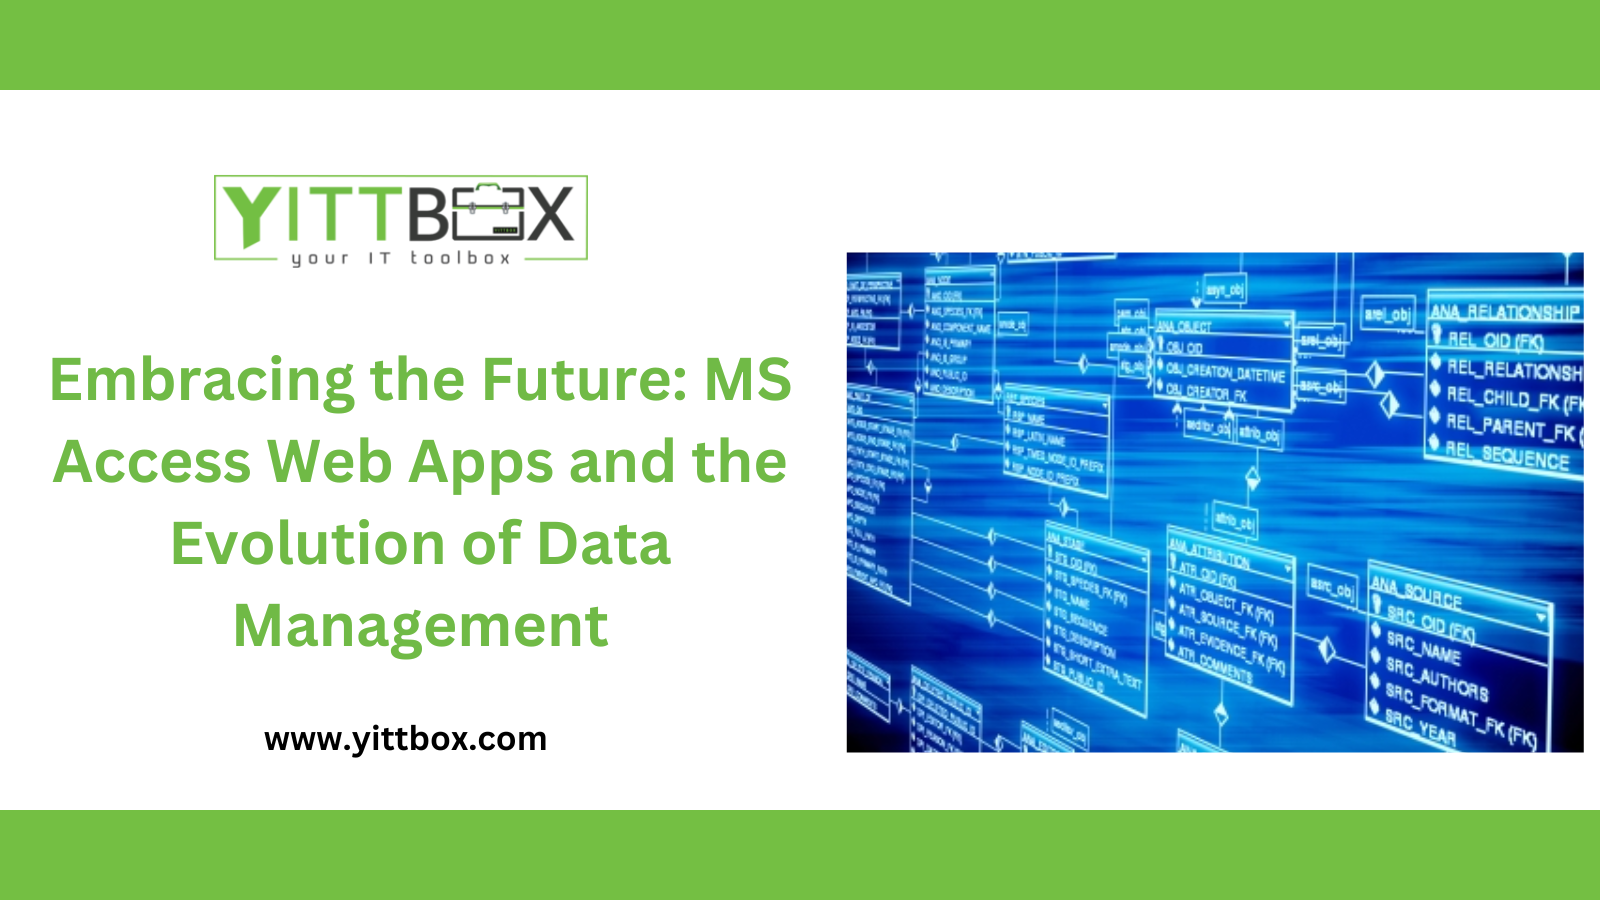 Embracing the Future: MS Access Web Apps and the Evolution of Data Management